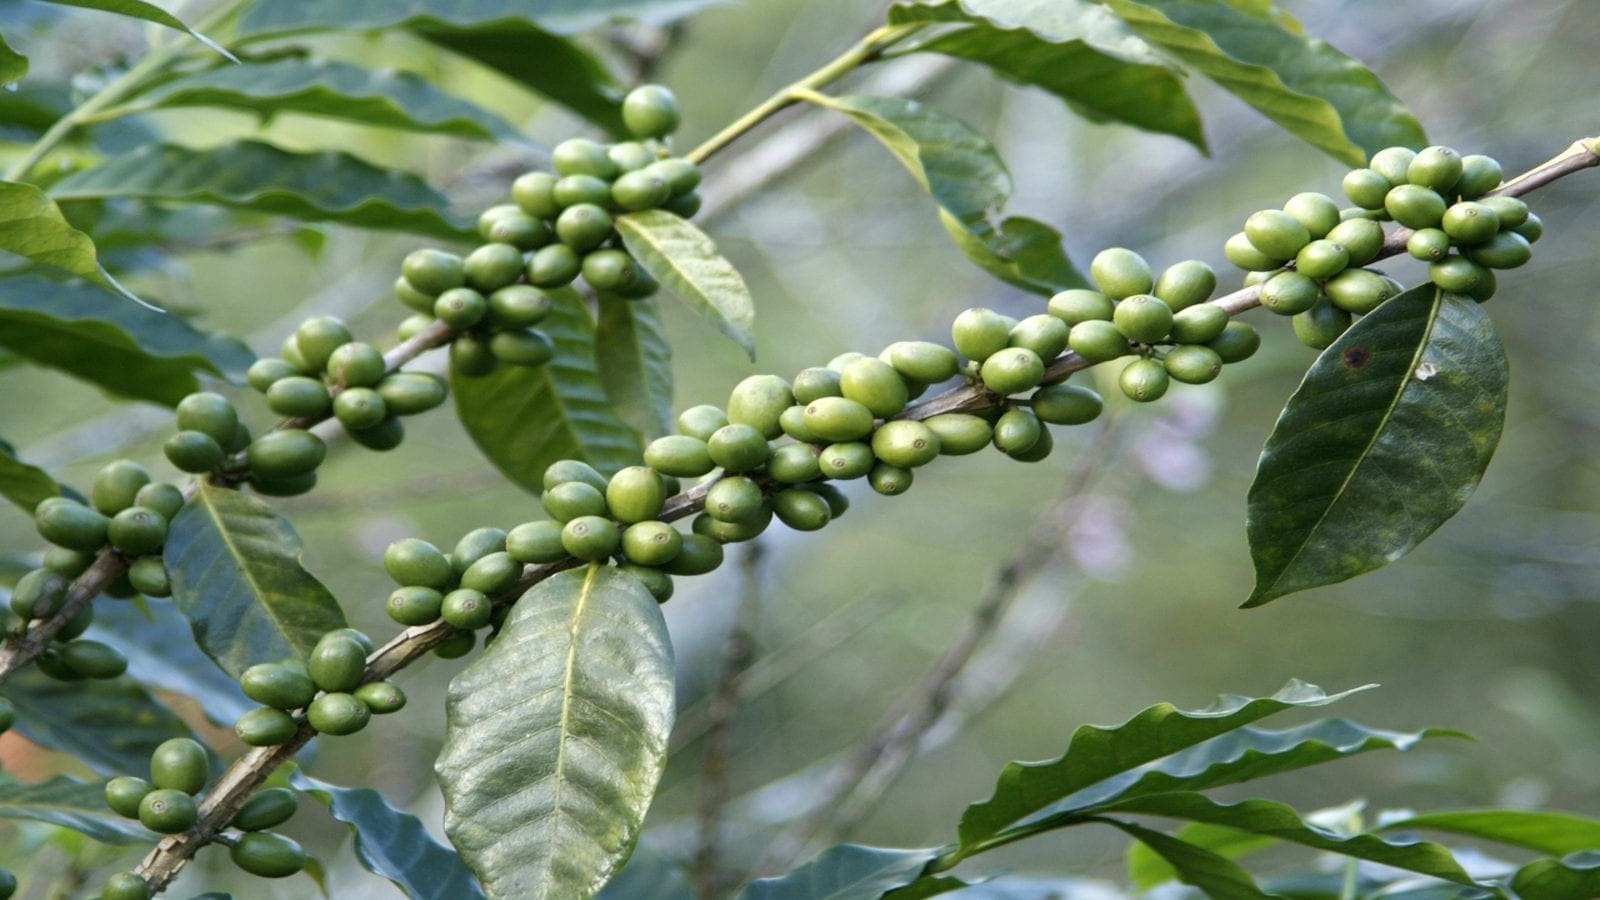 Nestlé discovers climate resilient coffee varieties, records 15% jump in Q1 profits in India